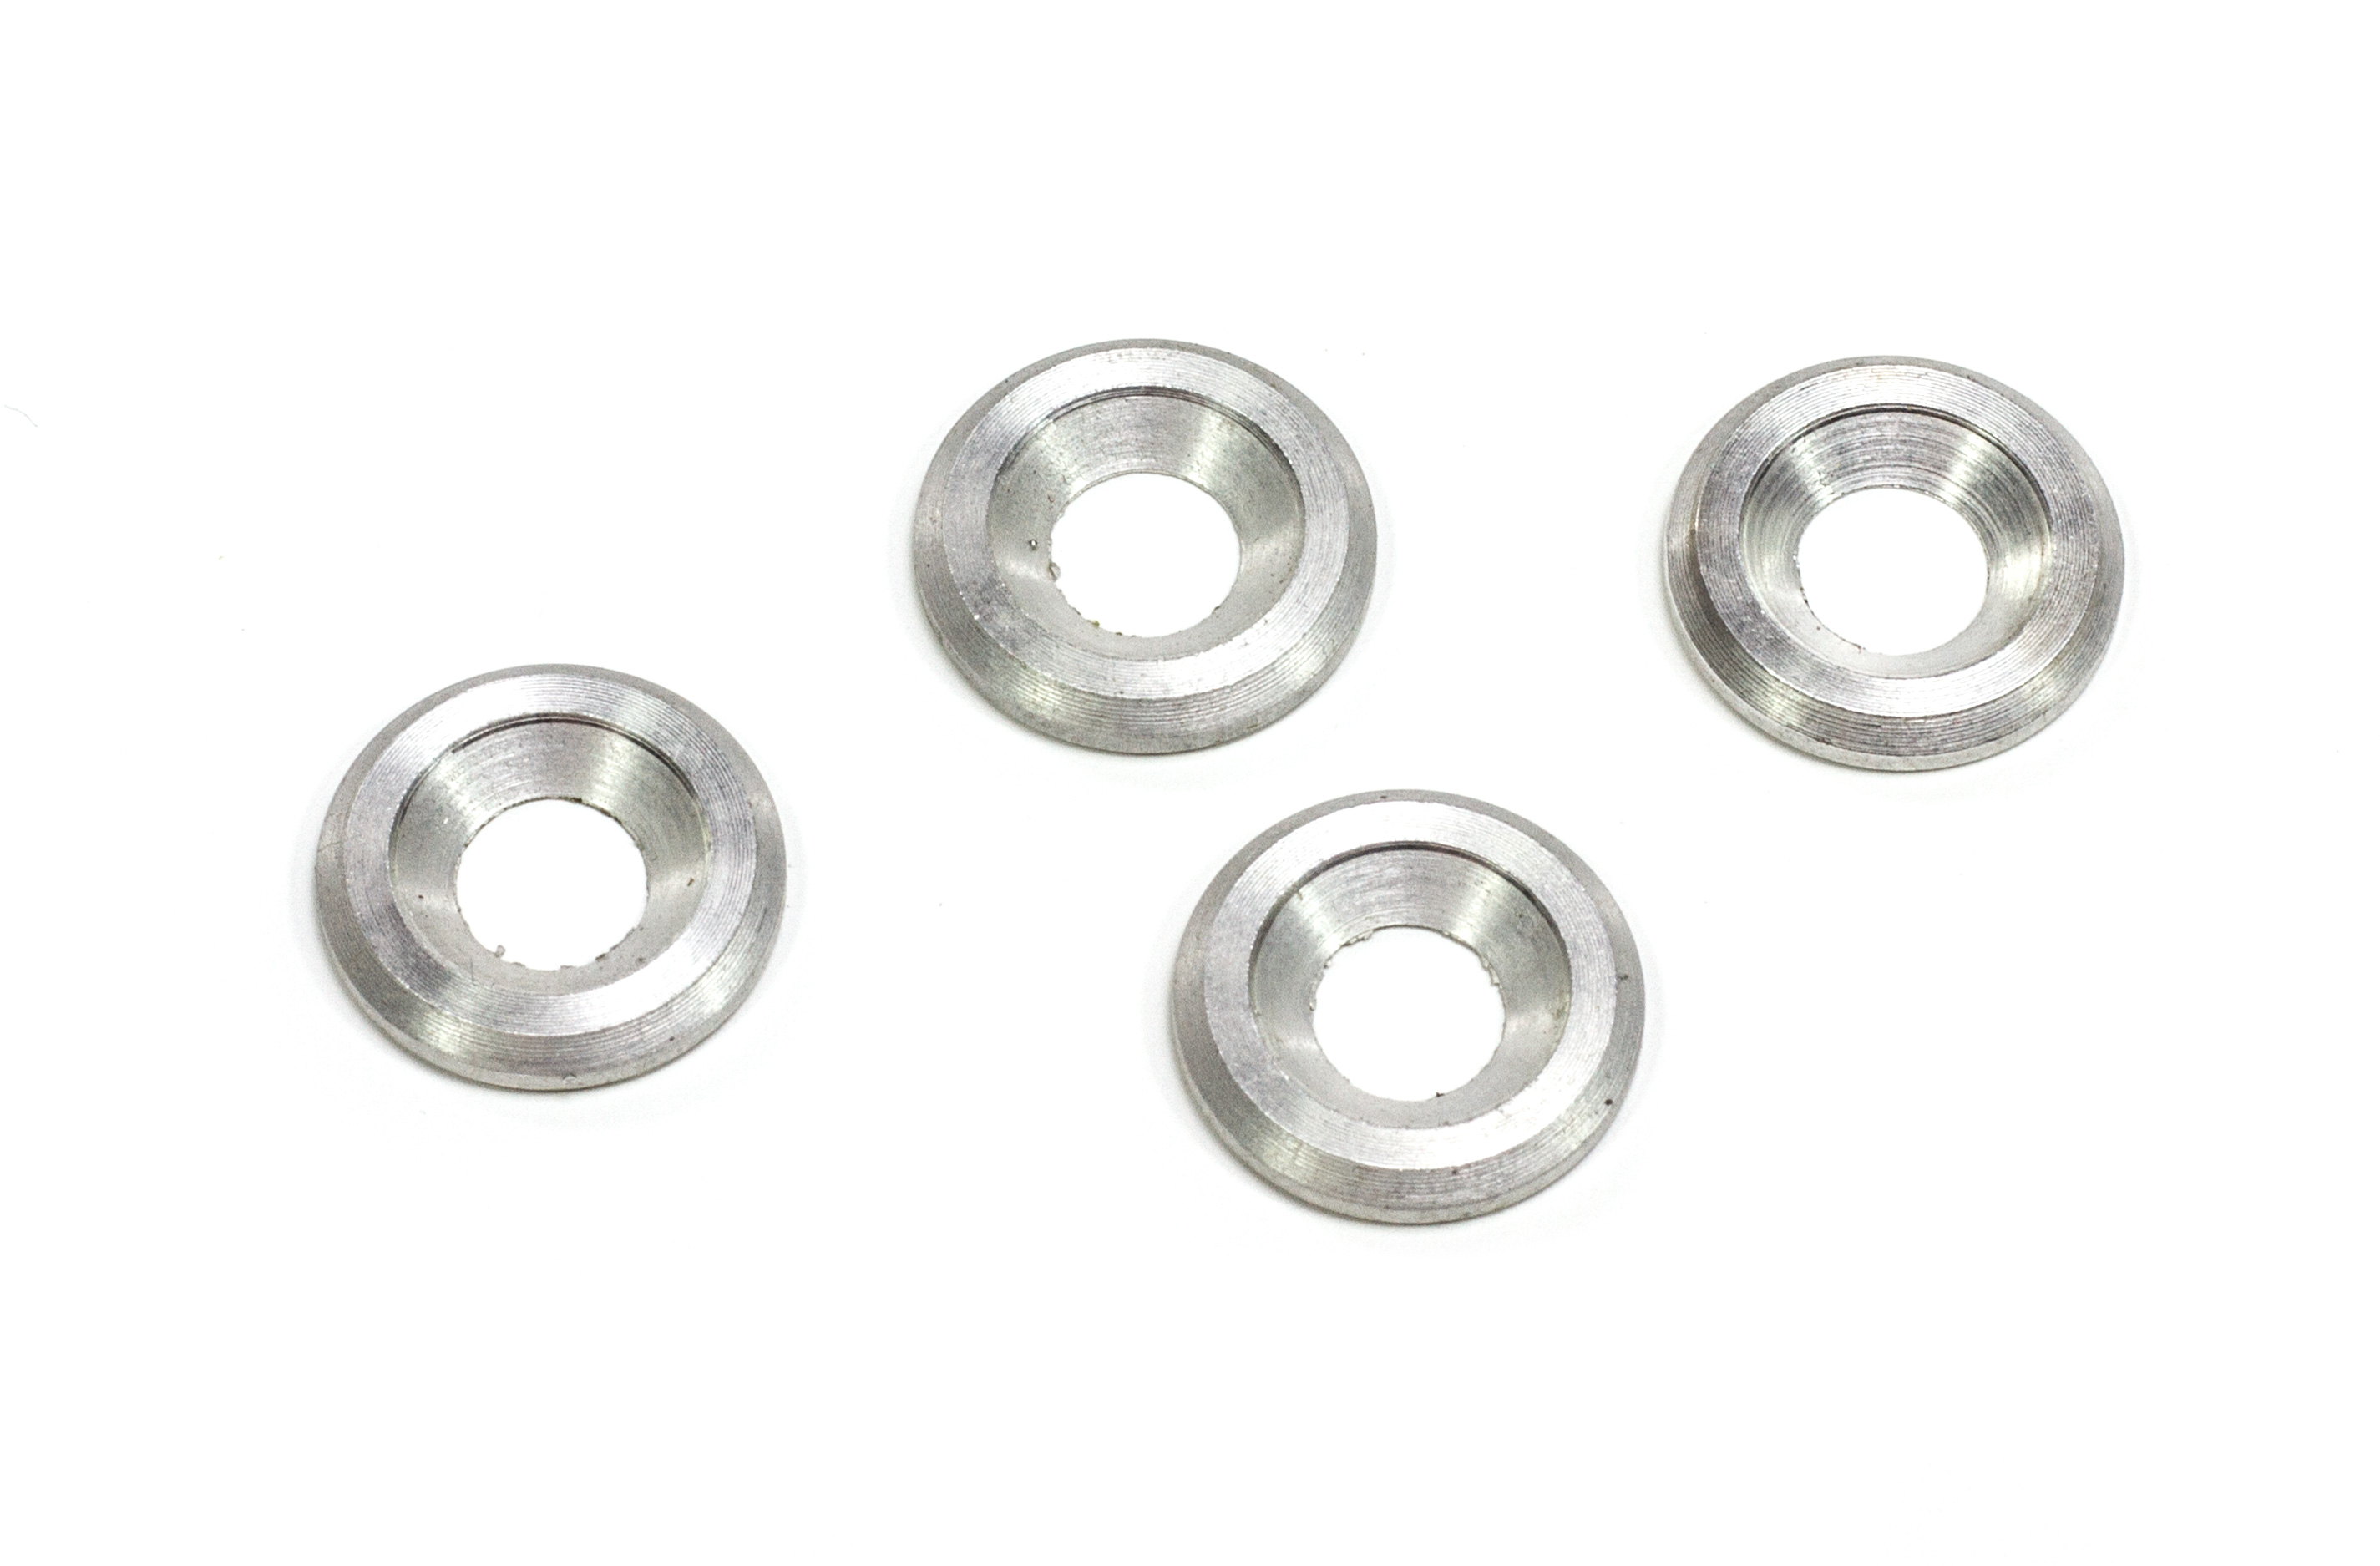 6038 FG Engine mount washers for M4 and M4 screws